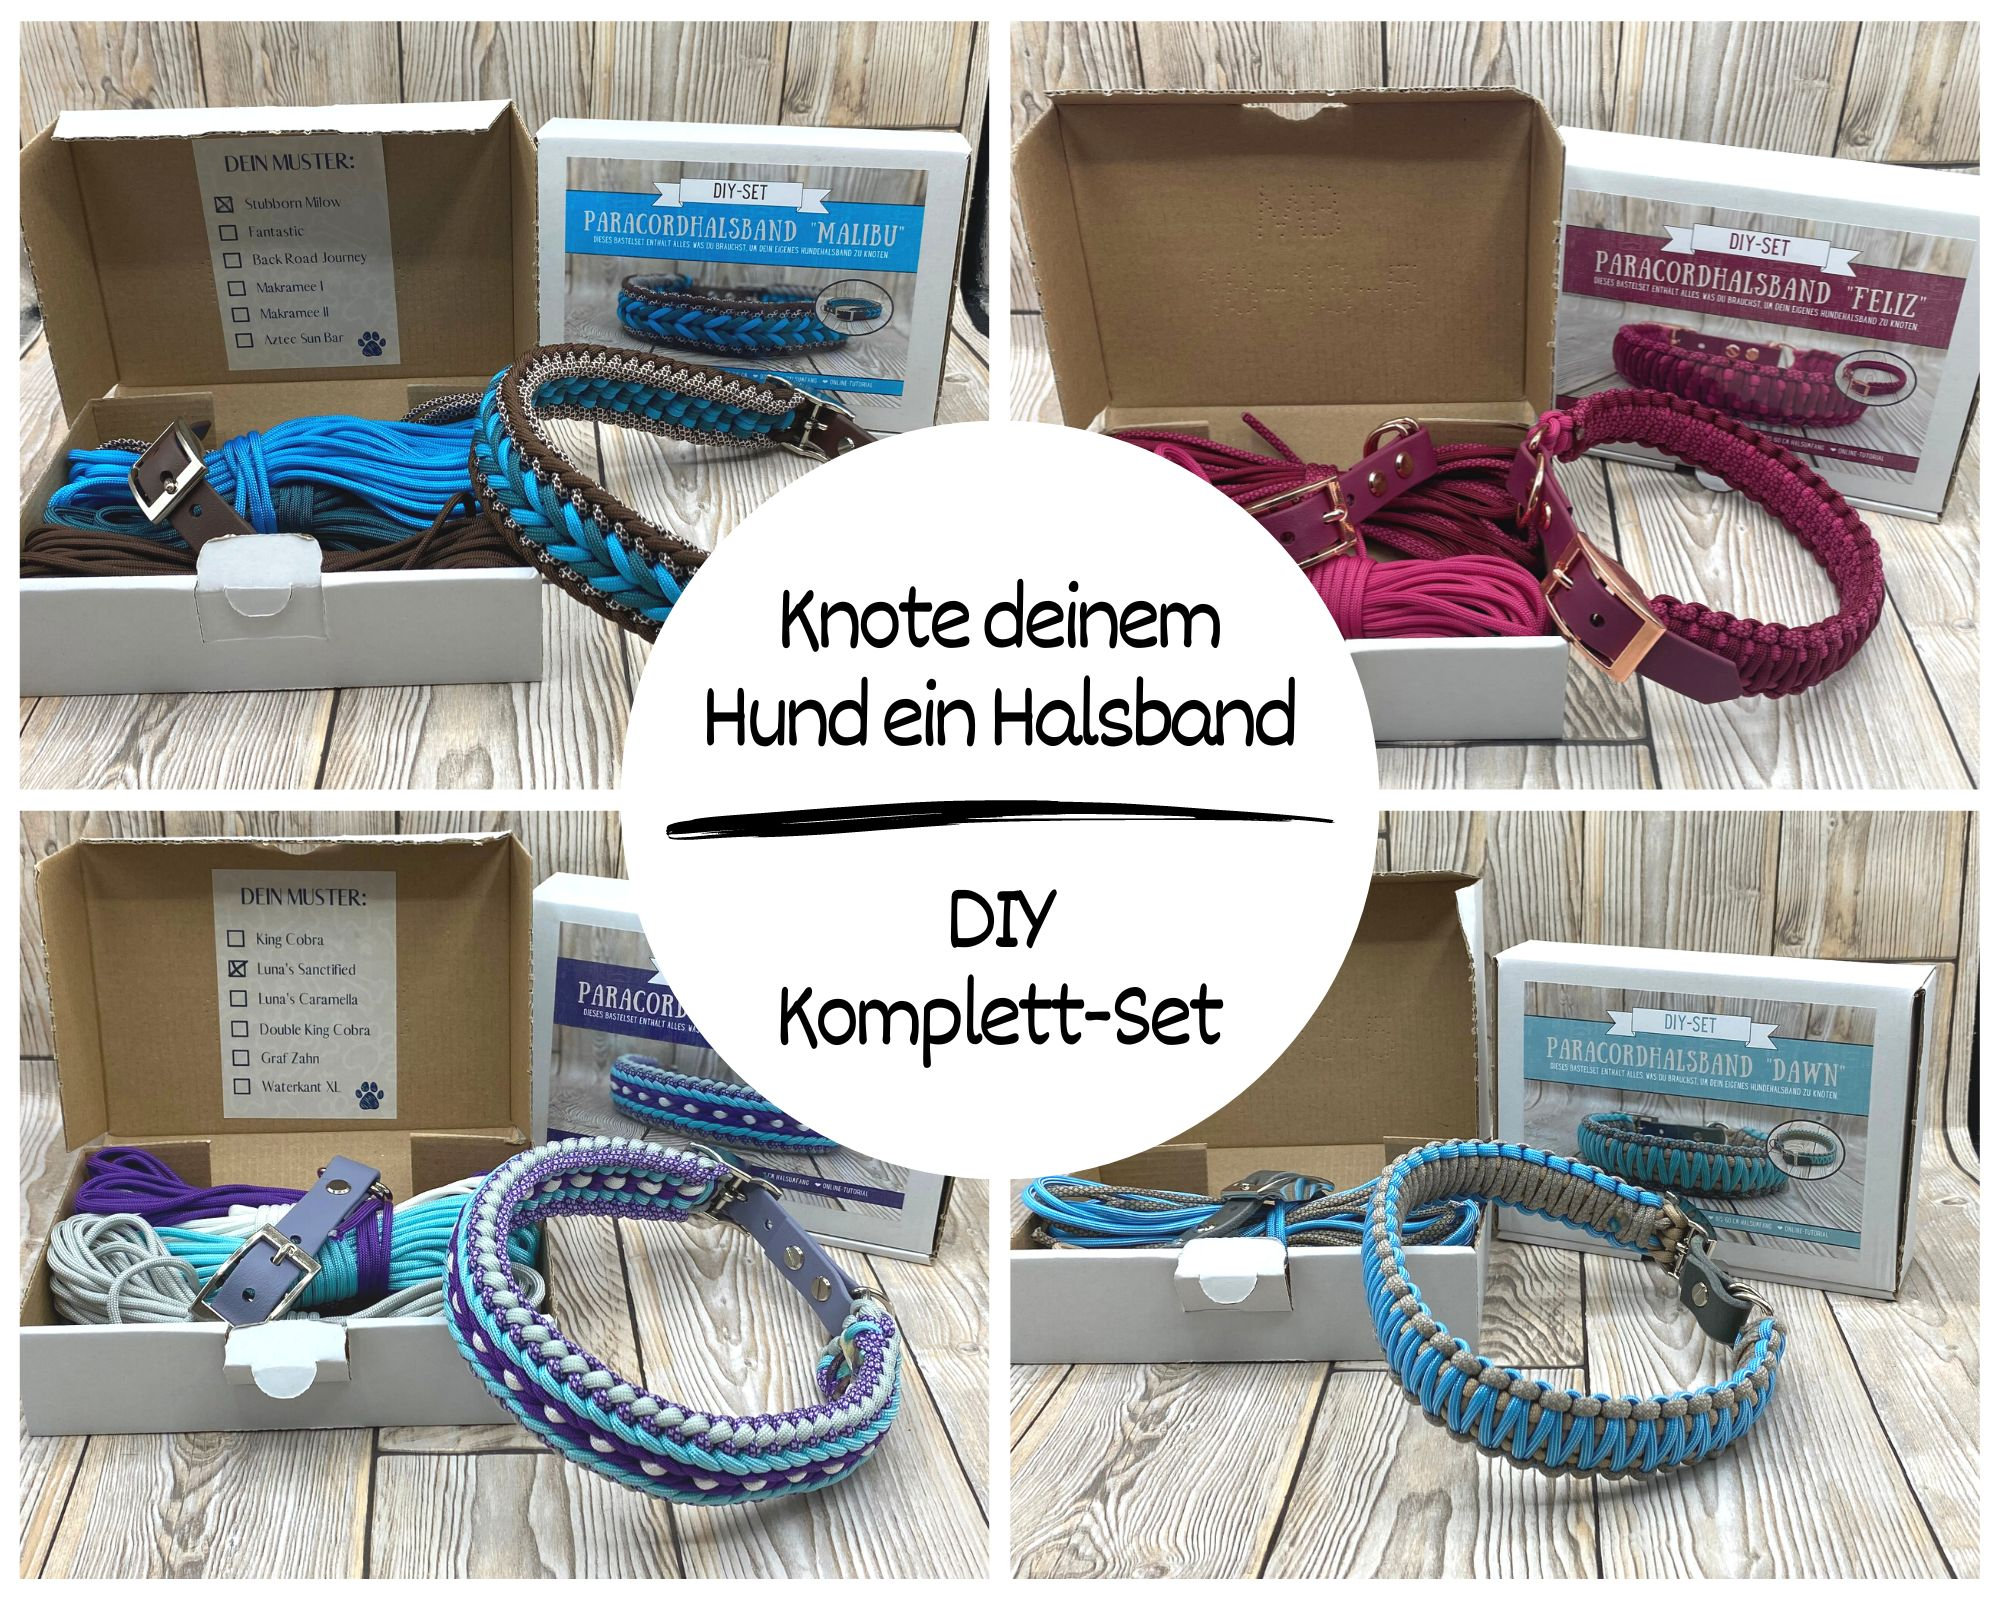 Make Your Own Dog Collar in Pink or Blue Crafting Kits for 